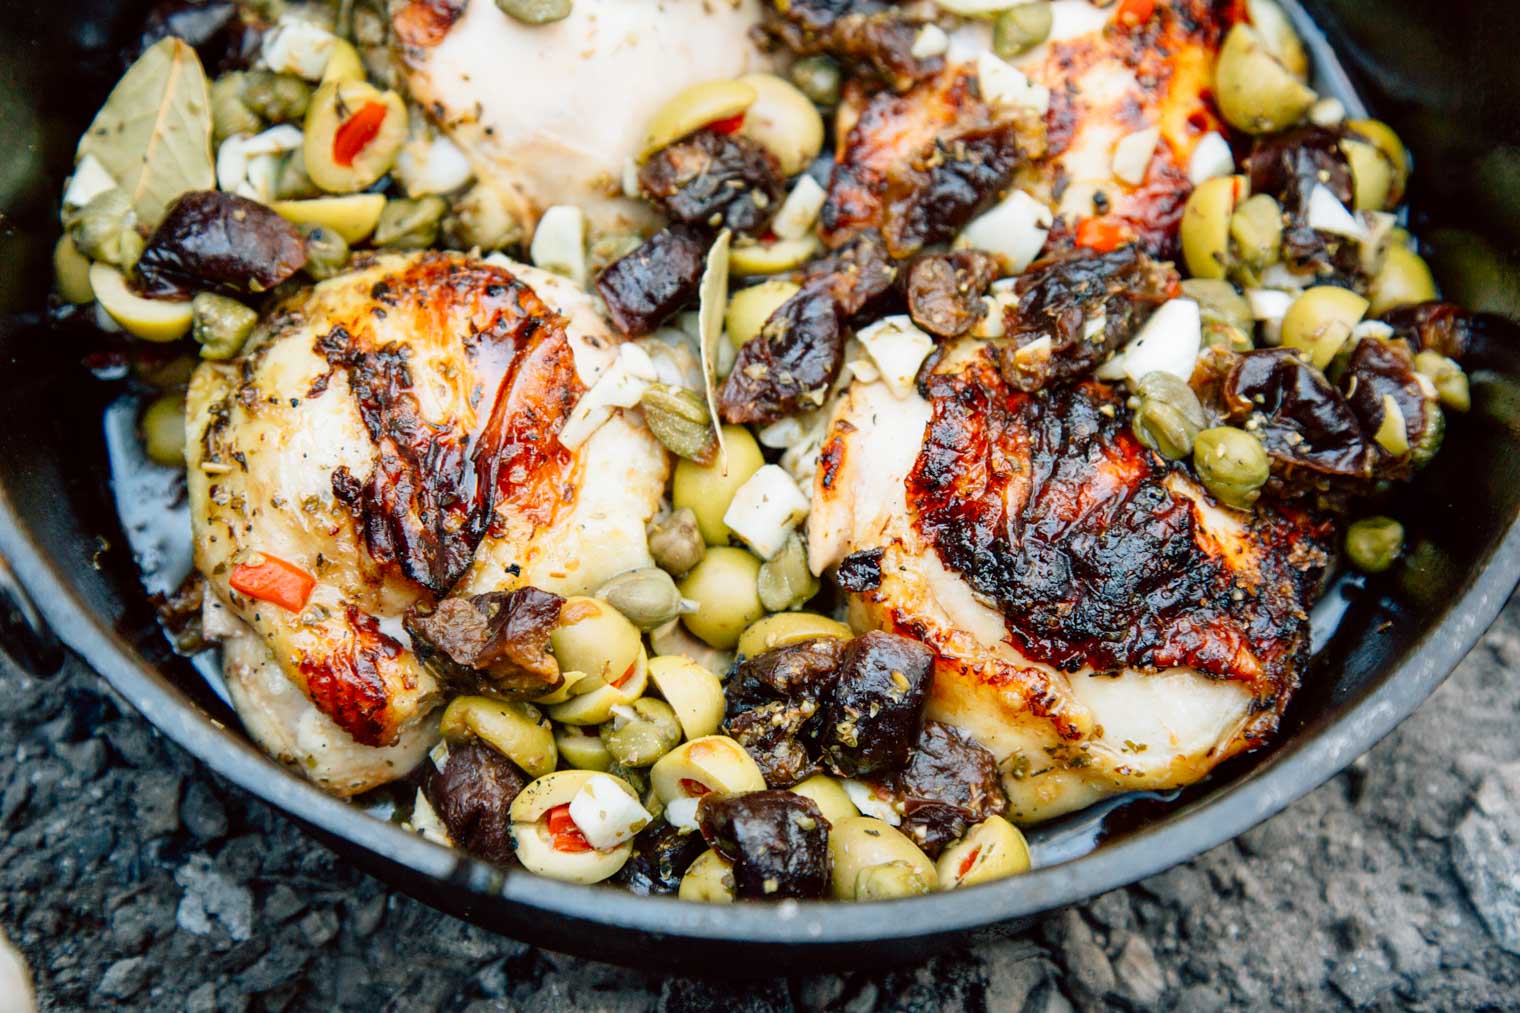 Pieces of chicken Marbella in a Dutch oven